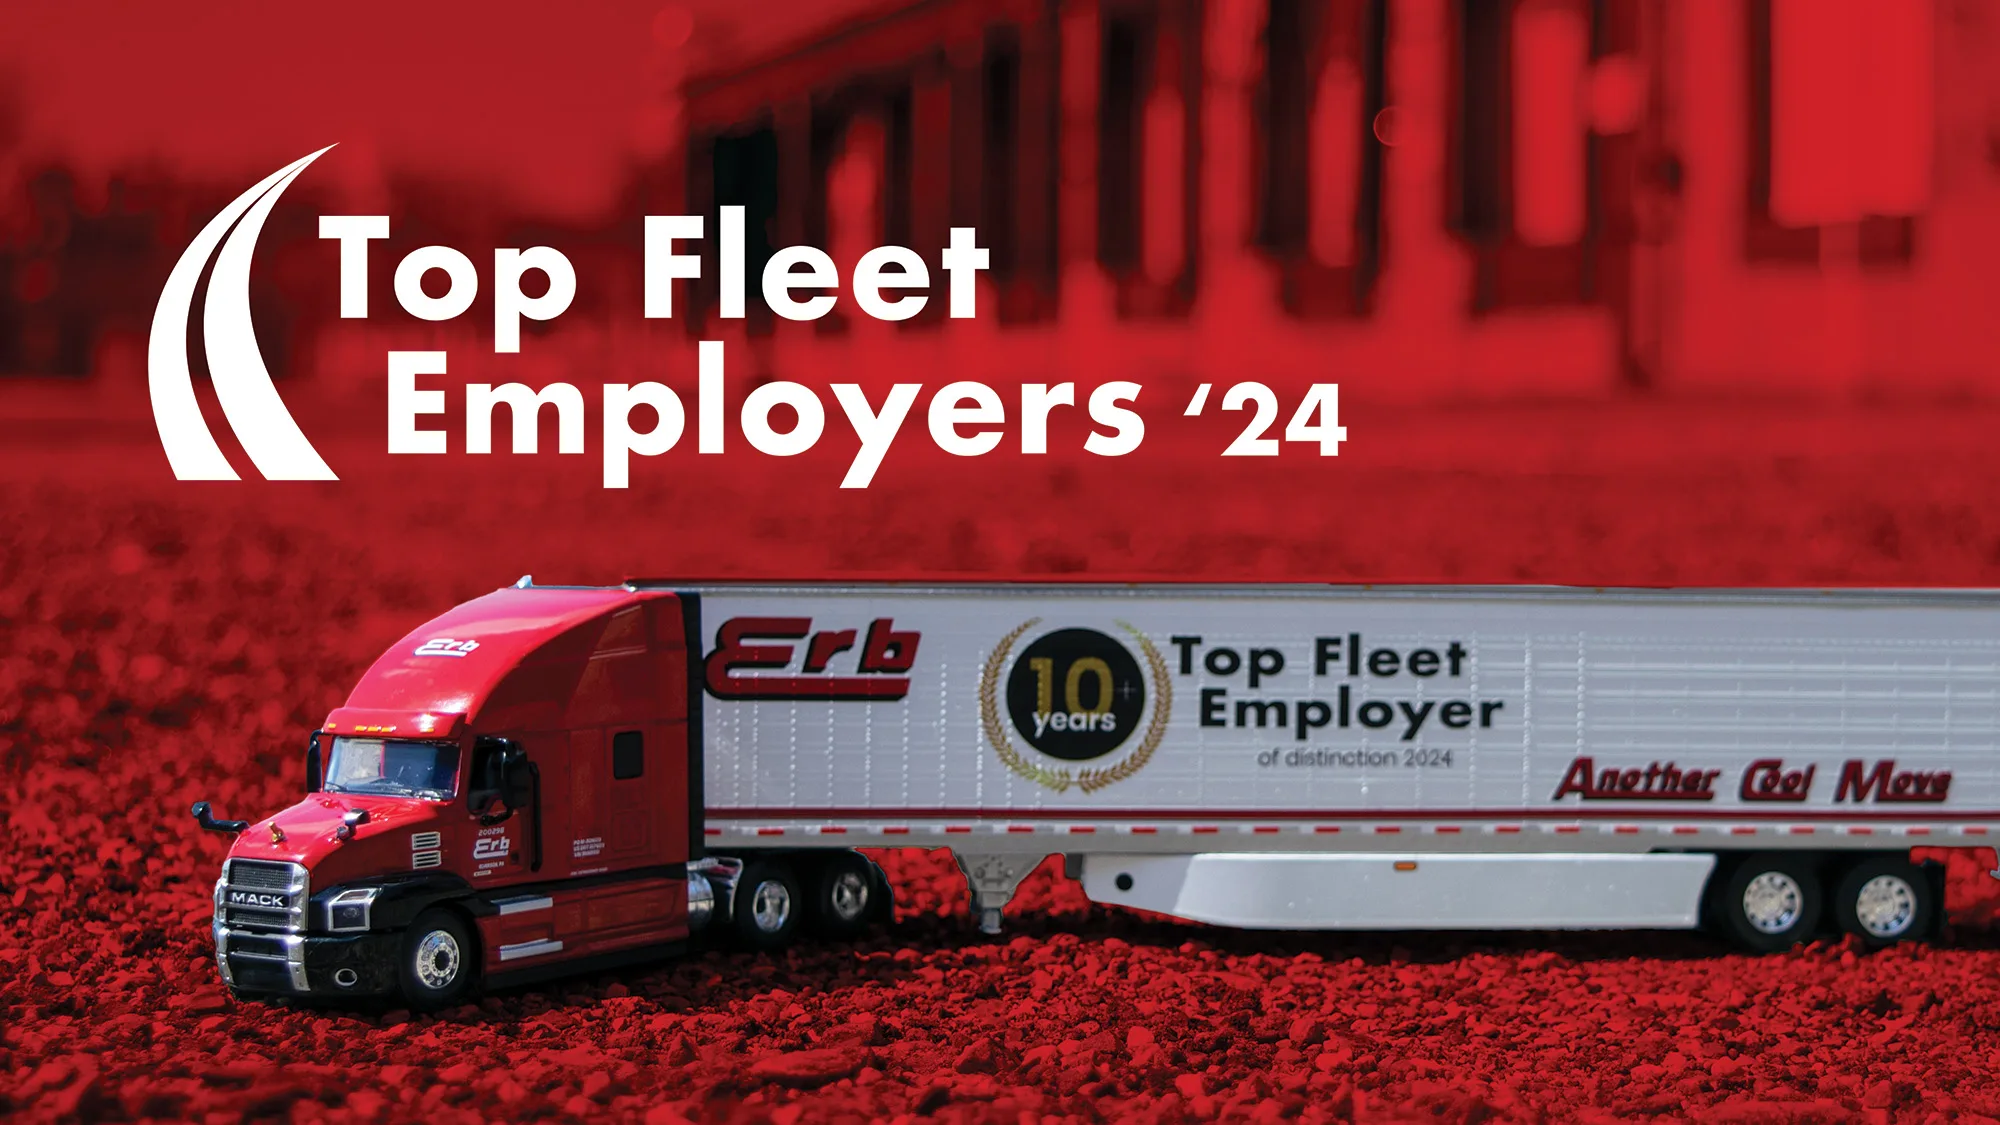 The Erb Group Celebrates 11 Years of Being a Top Fleet Employer